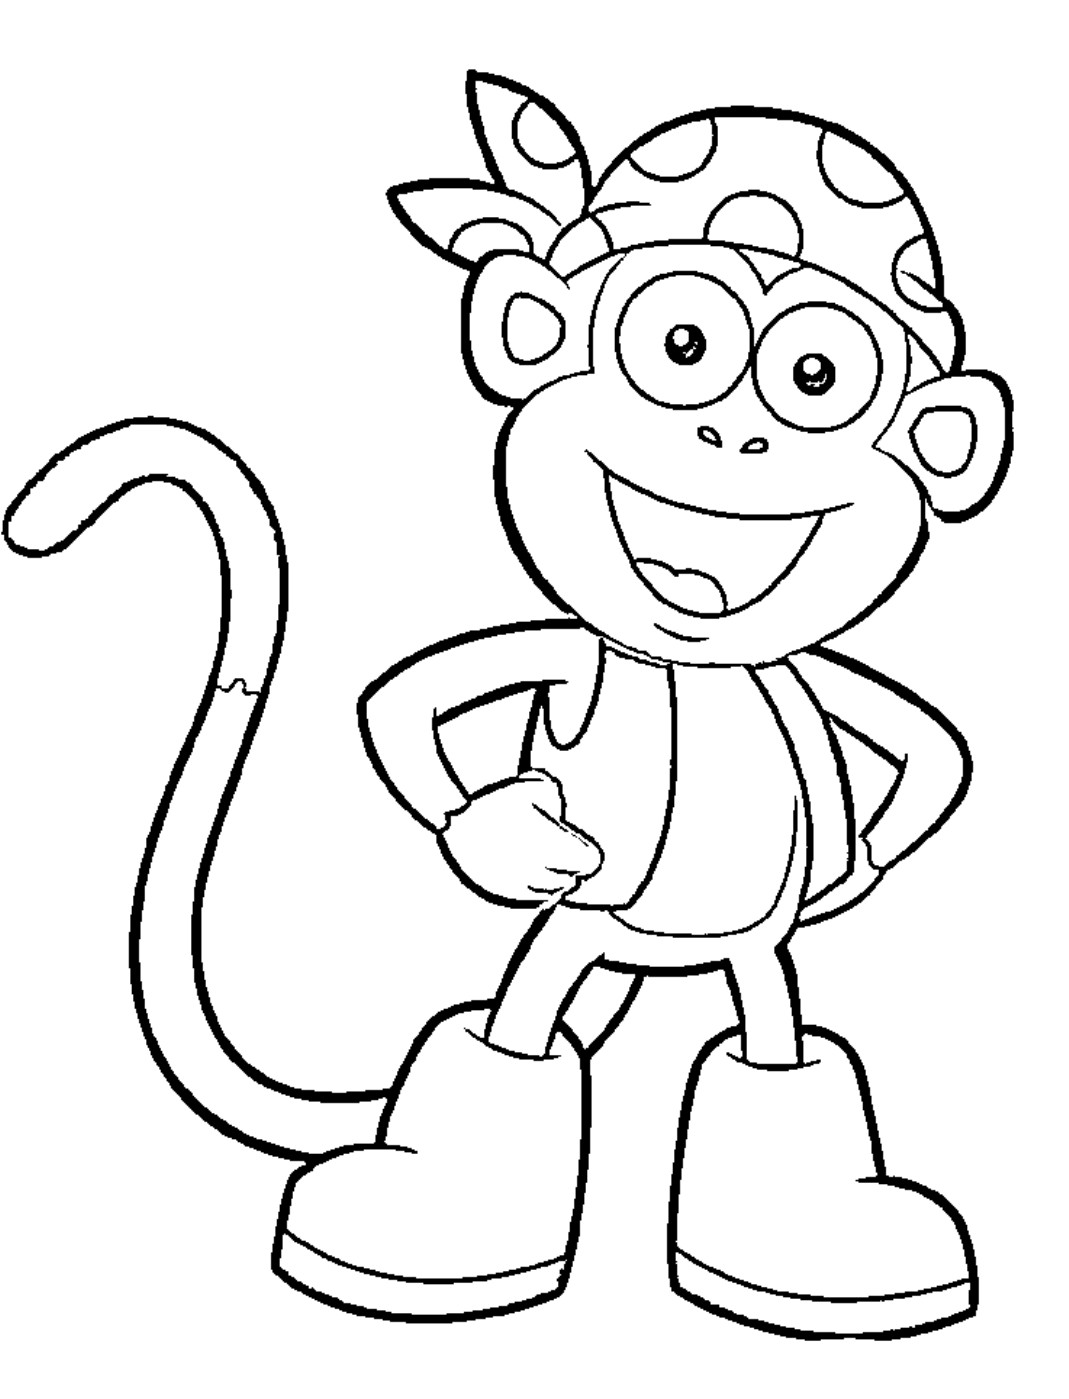 Free Printable Cartoon Coloring Pages
 Printable Cartoon Characters Coloring Pages Coloring Home